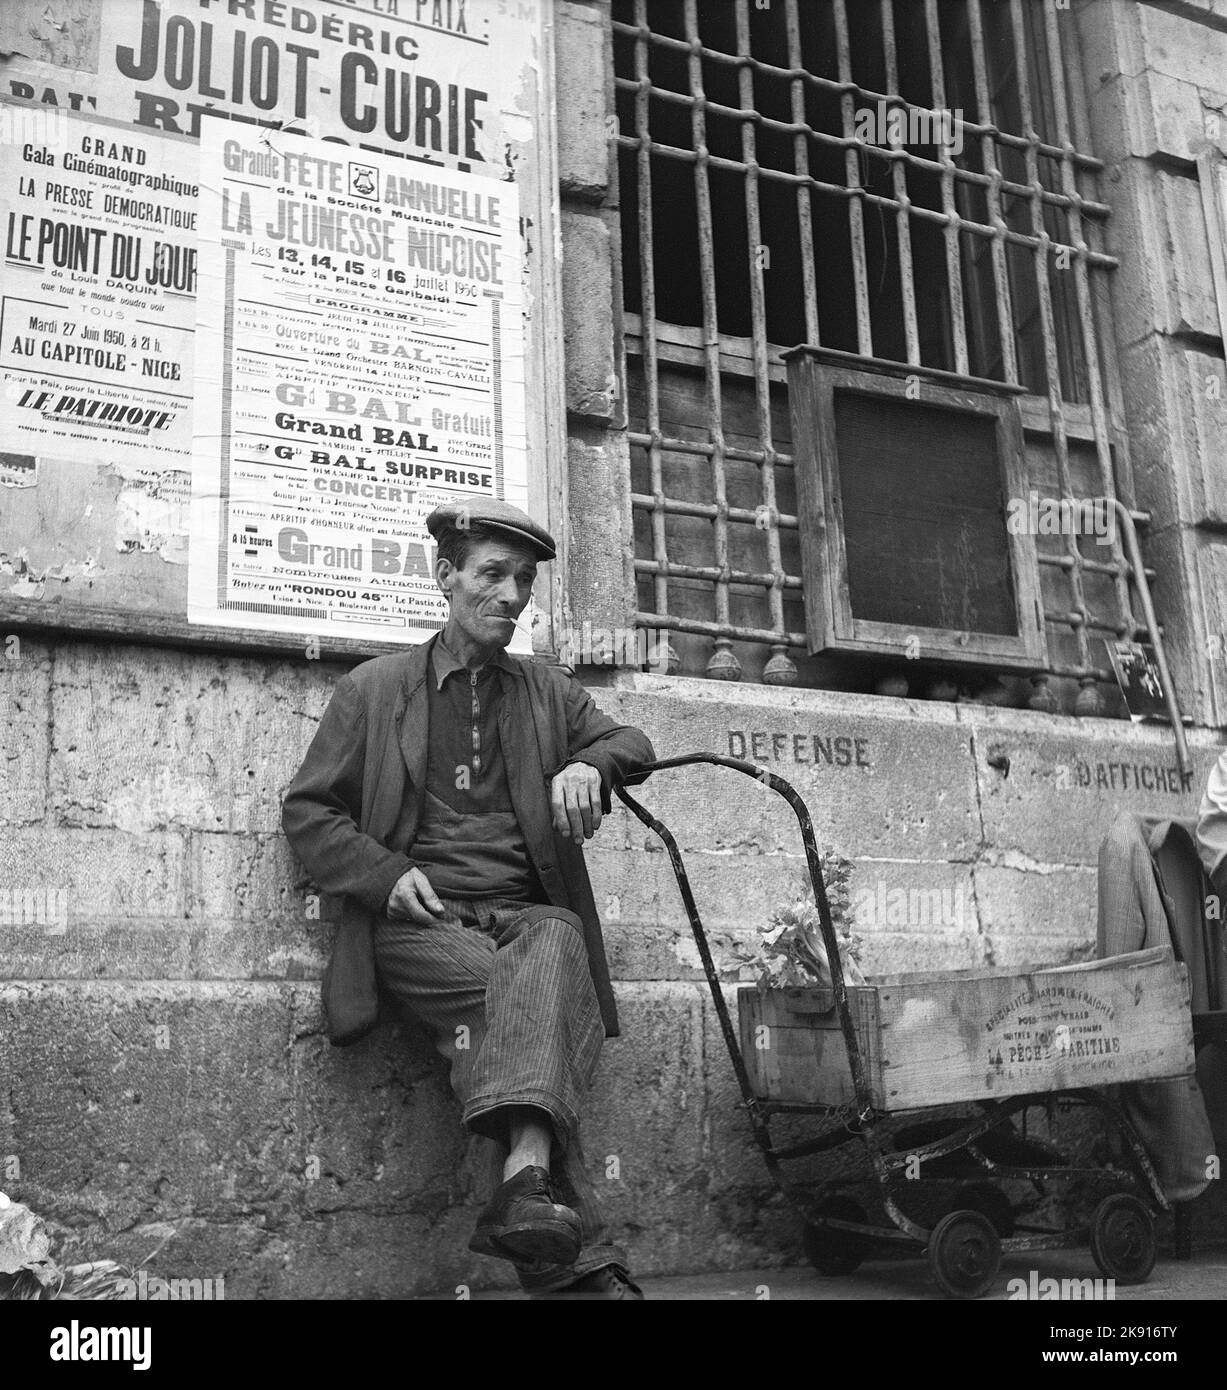 France in the 1950s. A man in the street is sitting having a cigarette. He leans on a primitive cart, on the wall behind him billboards are visible for previous and updoming events.  Cannes France 1950 Kristoffersson ref AZ60-11 Stock Photo